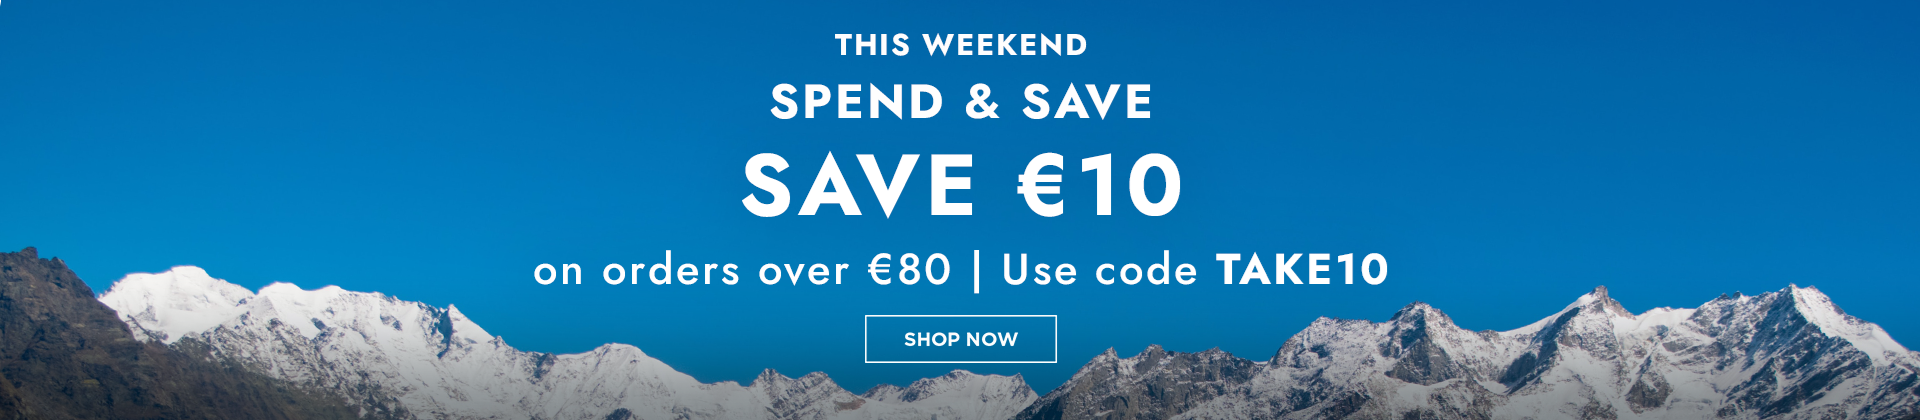 H1: SPEND AND SAVE WITH CODE TAKE10